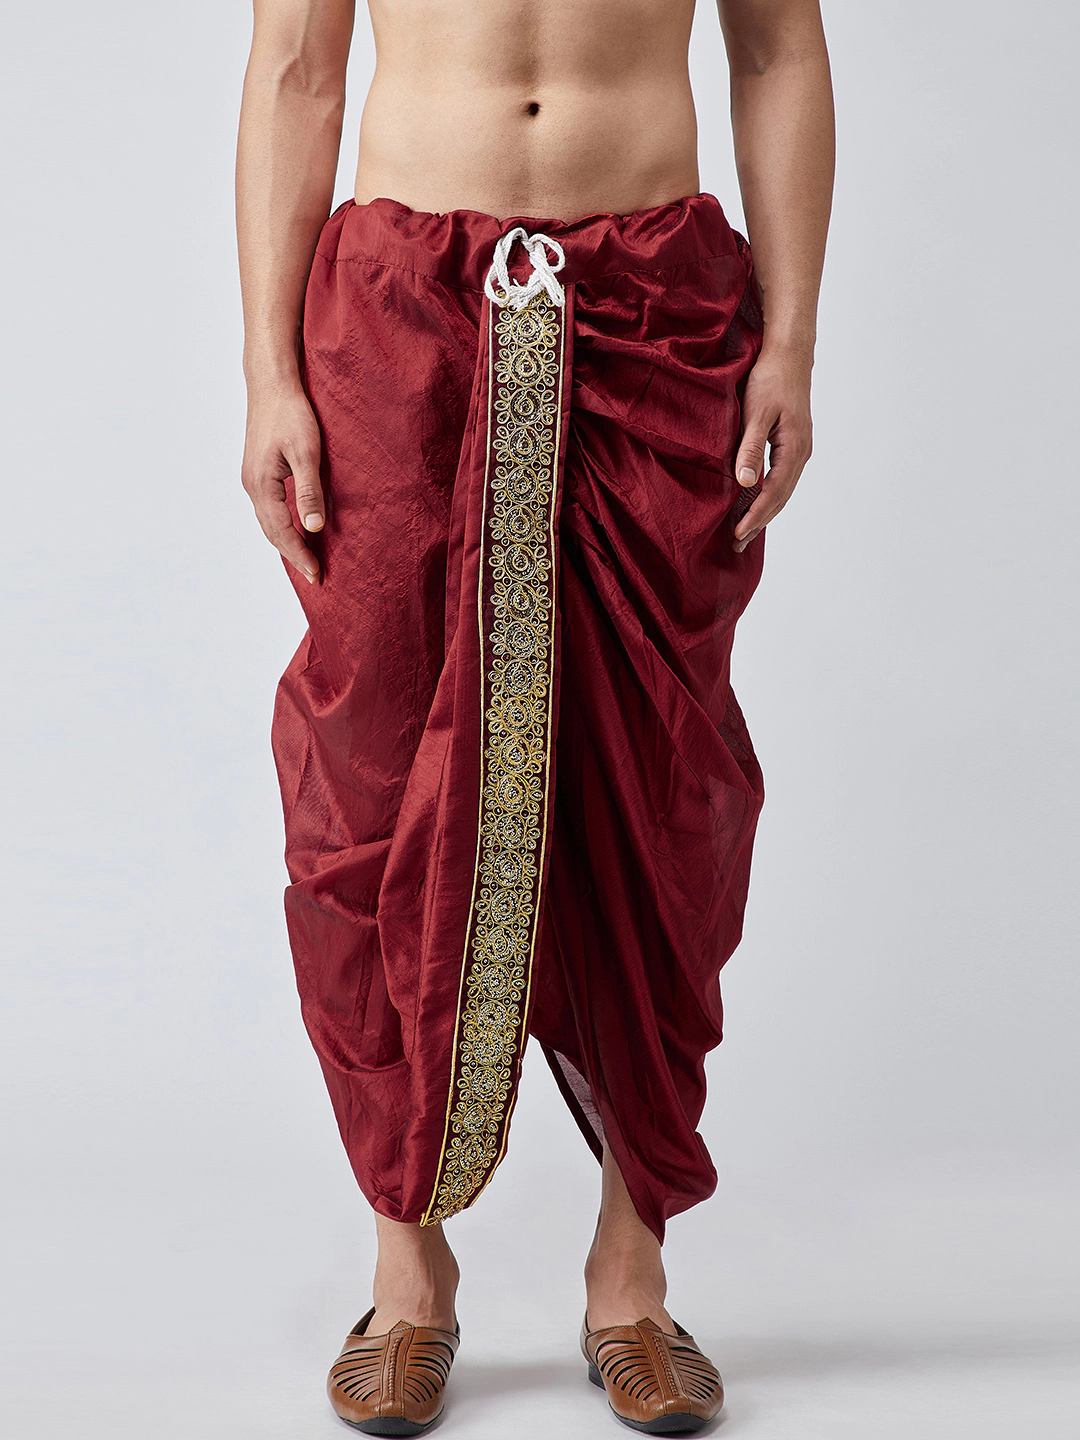 dhoti is the traditional dress for gujrati men